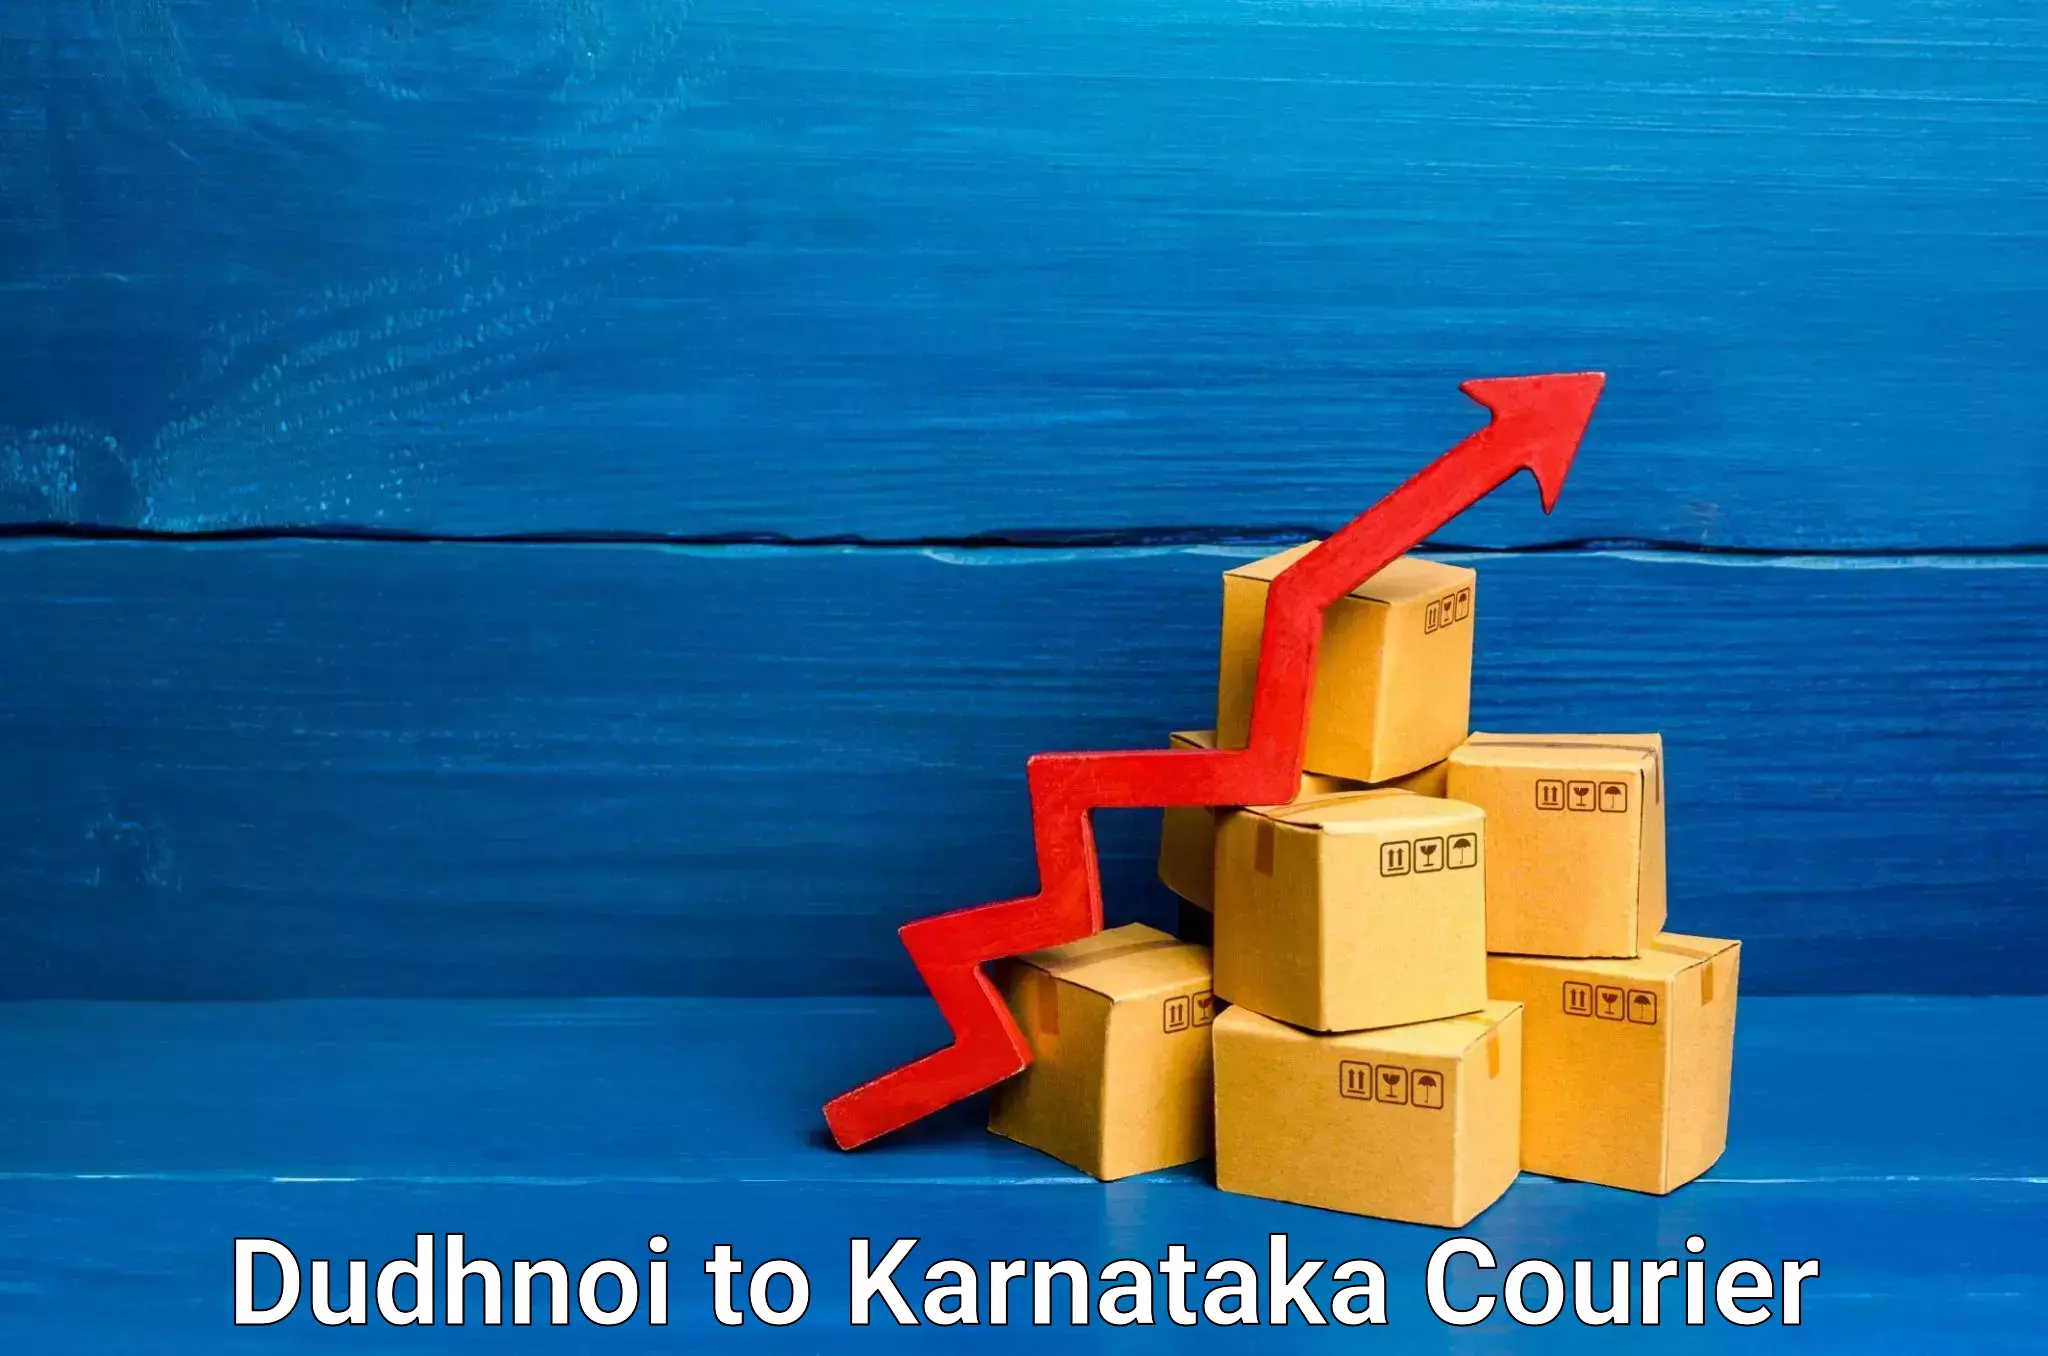 International courier networks Dudhnoi to Rona Gadag